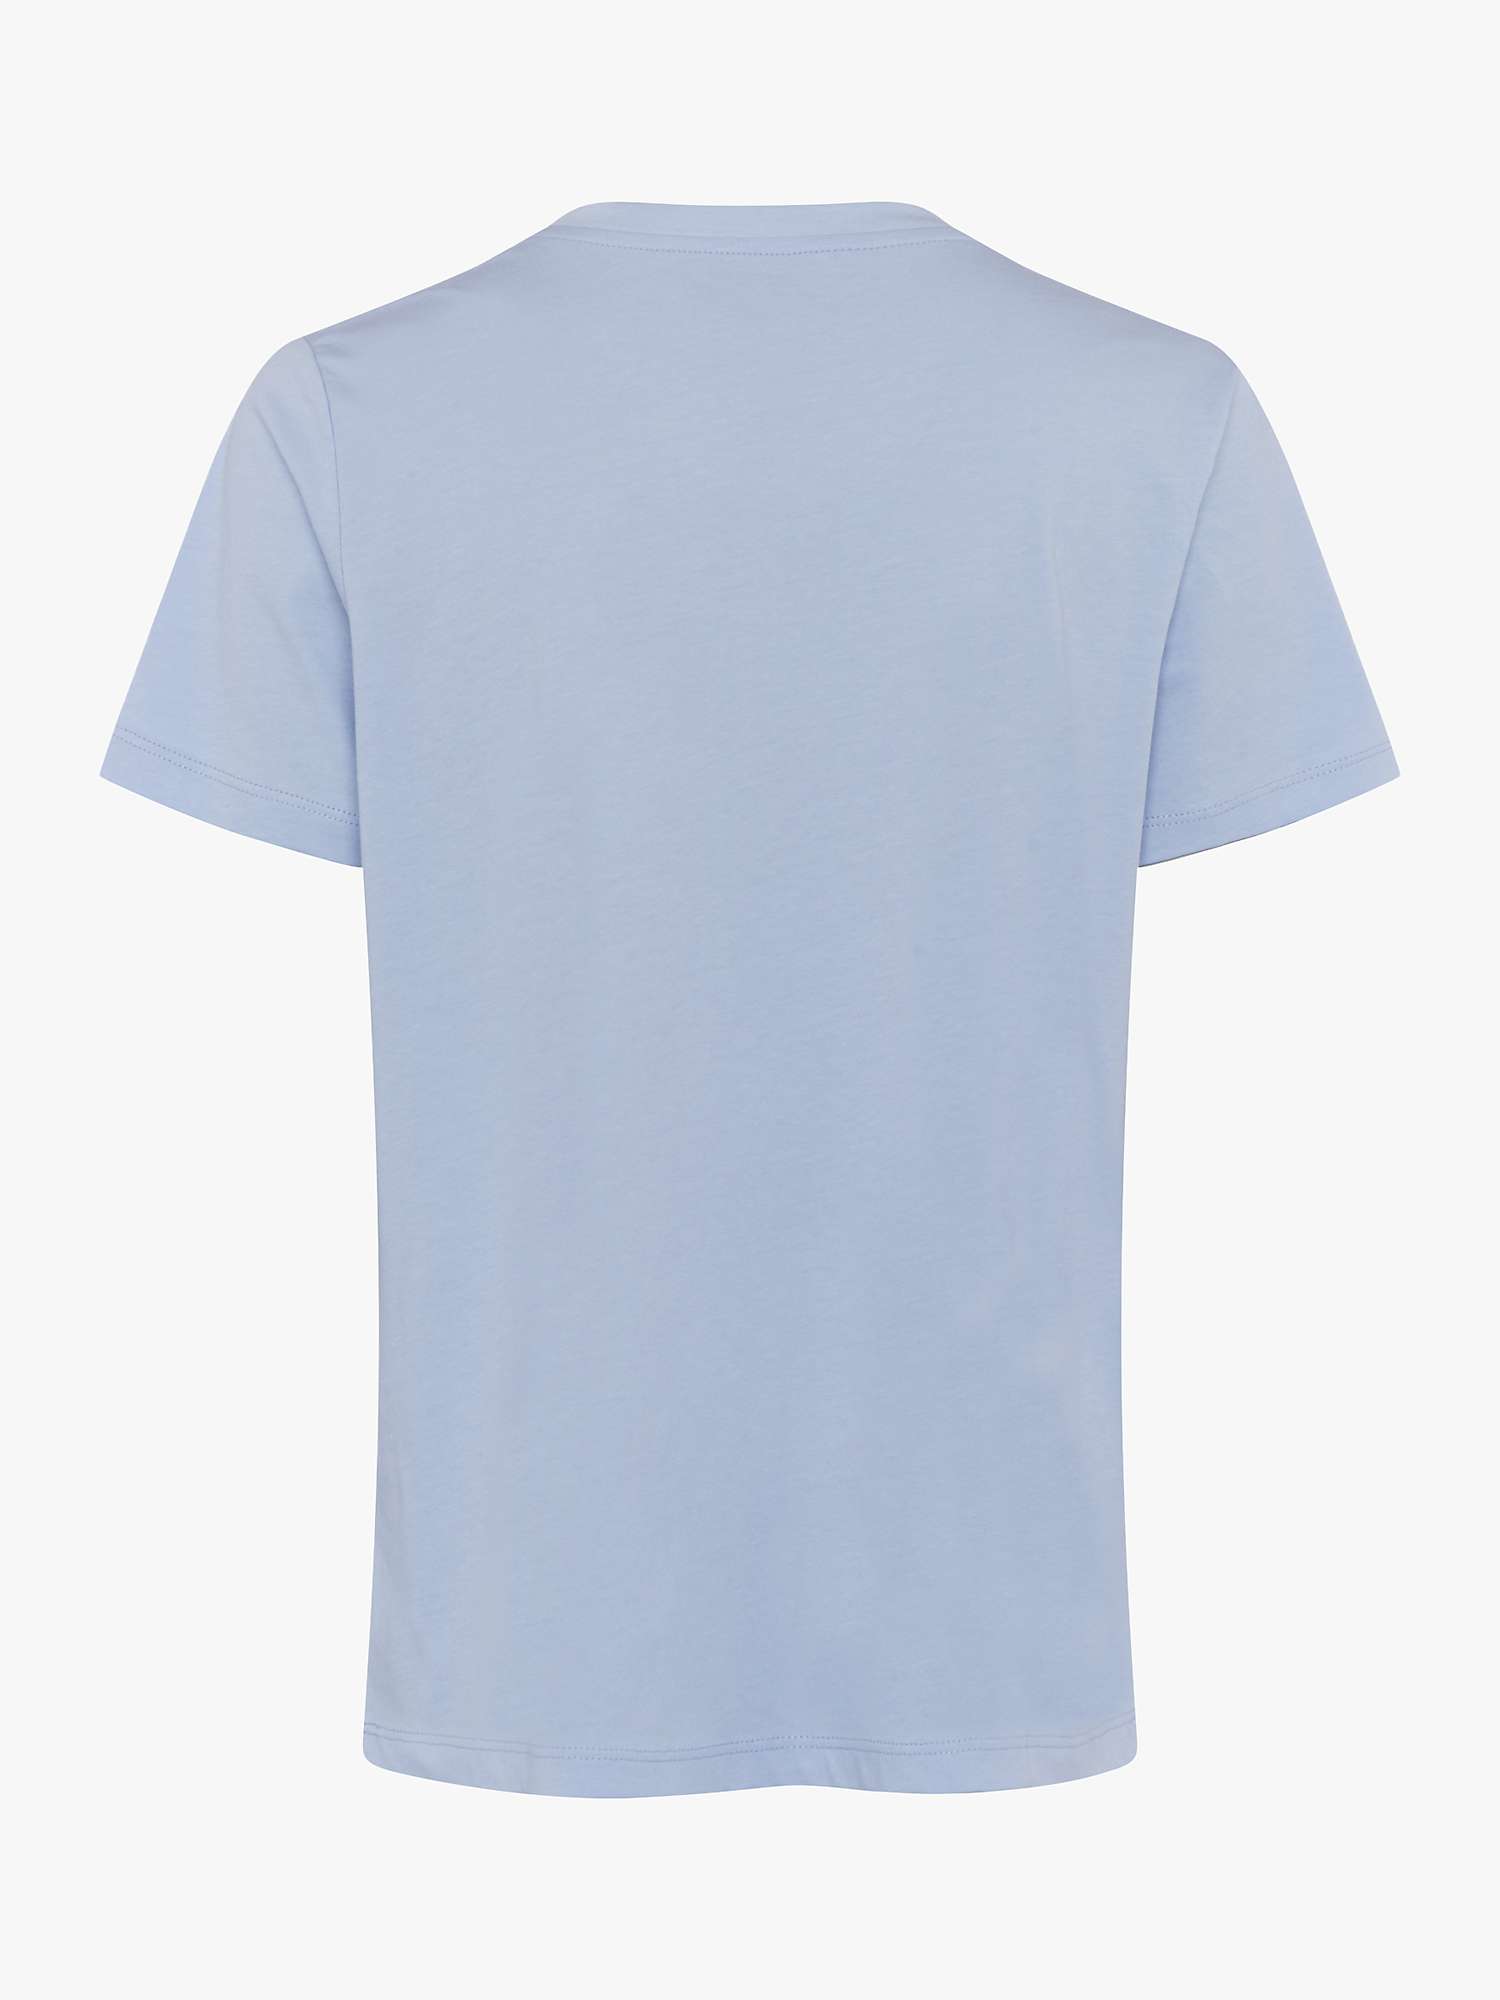 Buy French Connection Organic Cotton Boyfriend Fit Short Sleeve Tee Online at johnlewis.com